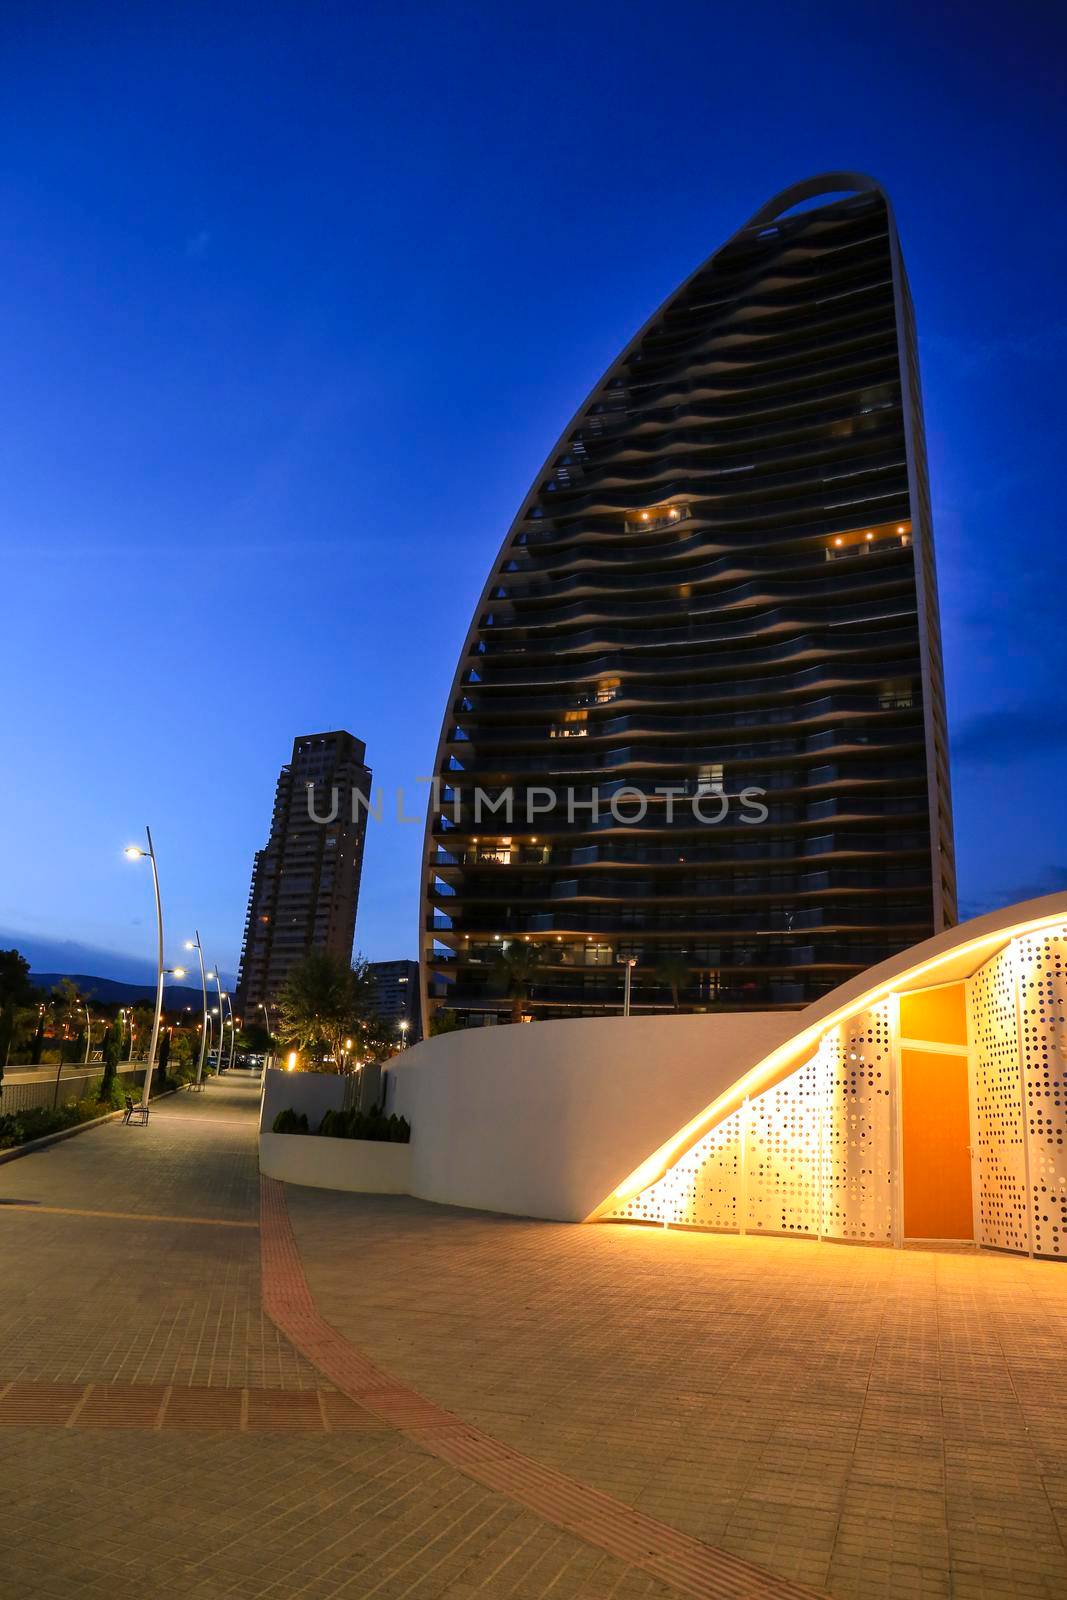 Modern architecture building on the Poniente beach Area in Benidorm at night by soniabonet